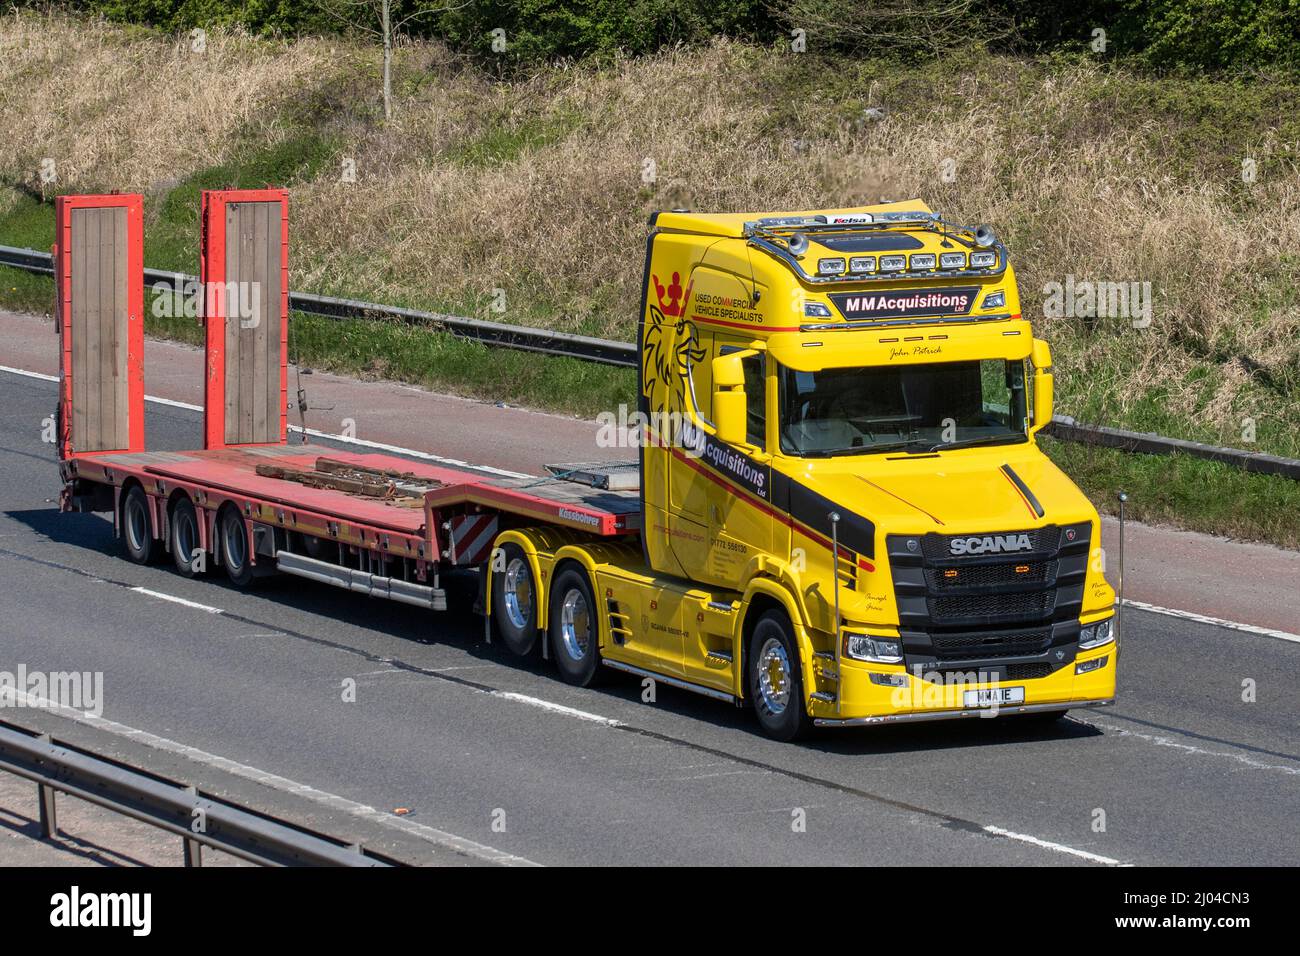 John Patrick M M Acquisitions used commercial Vehicle specialists 2020 SCANIA 650 ST-V8 yellow scania HGV truck transporter; livery lorry, heavy-duty vehicles, transportation, truck driving on the M61 Manchester, UK Stock Photo